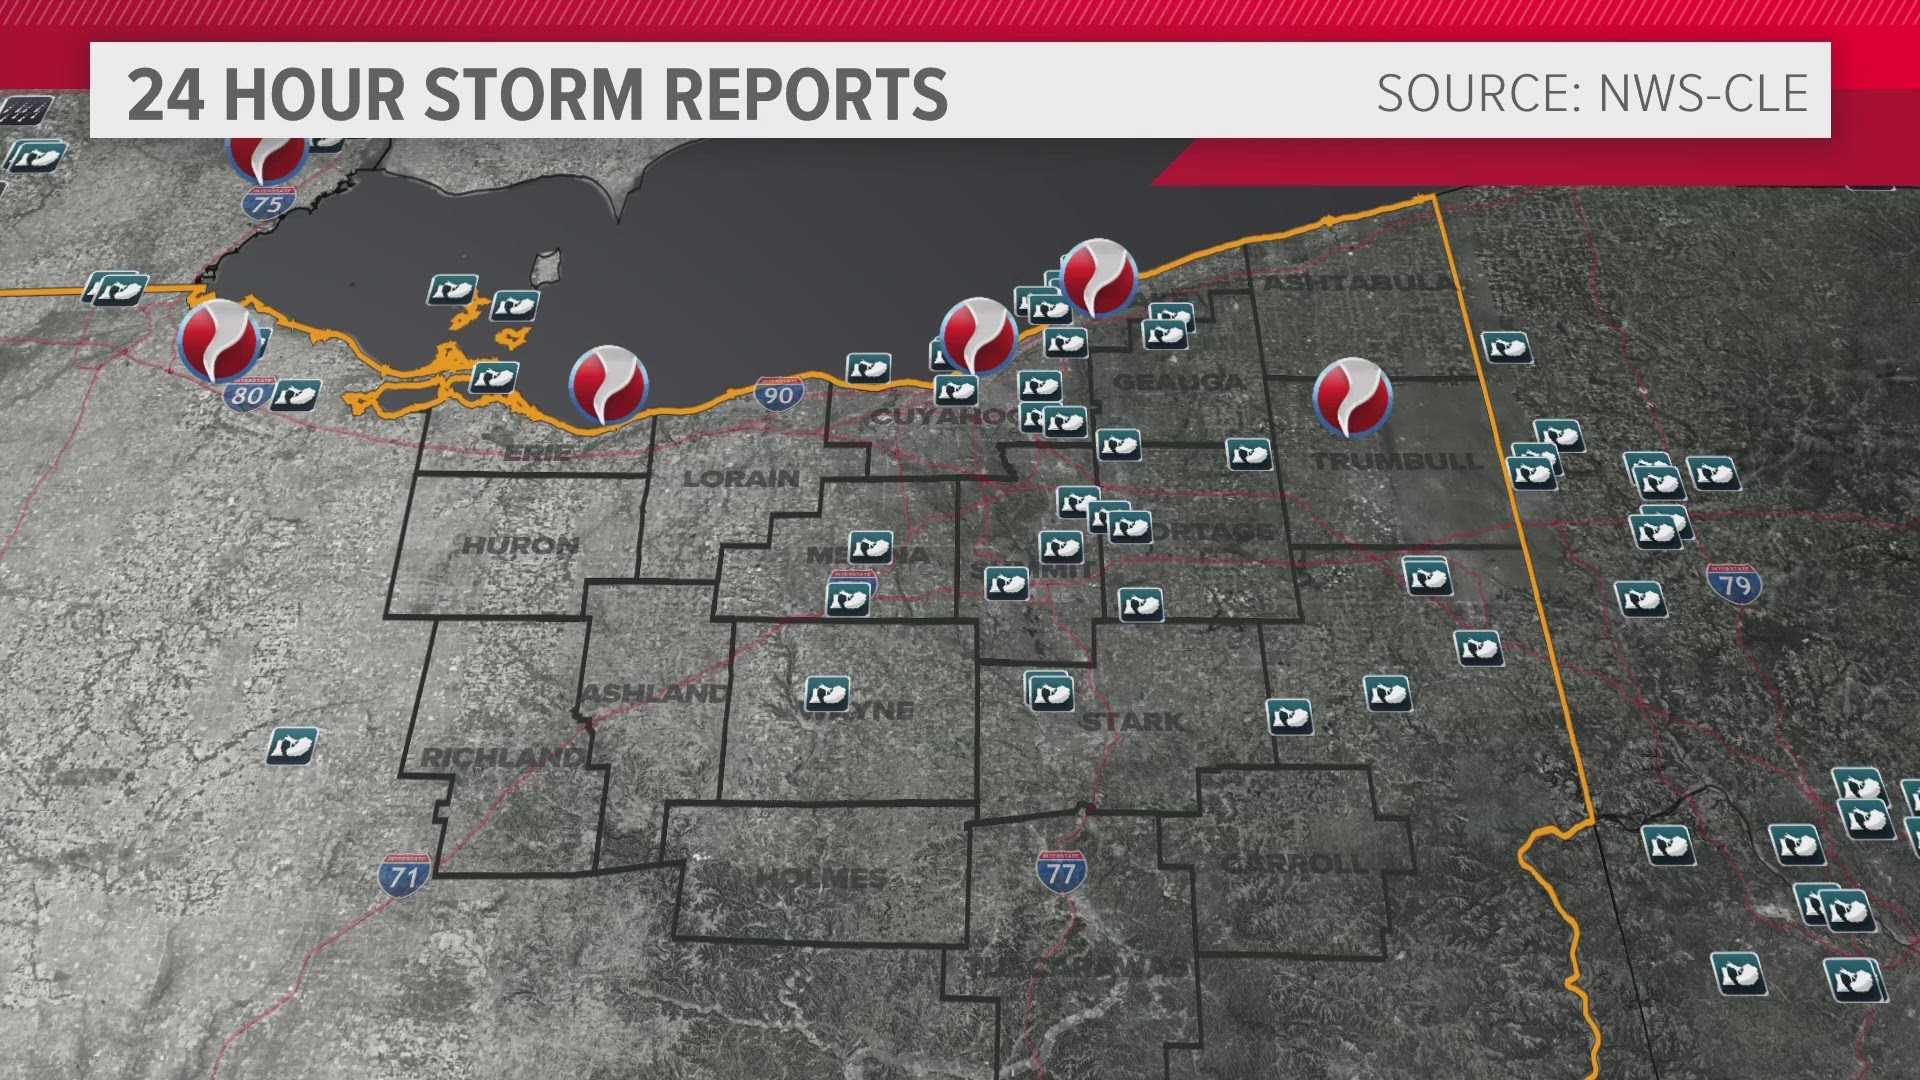 The twister was one of several storms that struck Northern Ohio overnight.